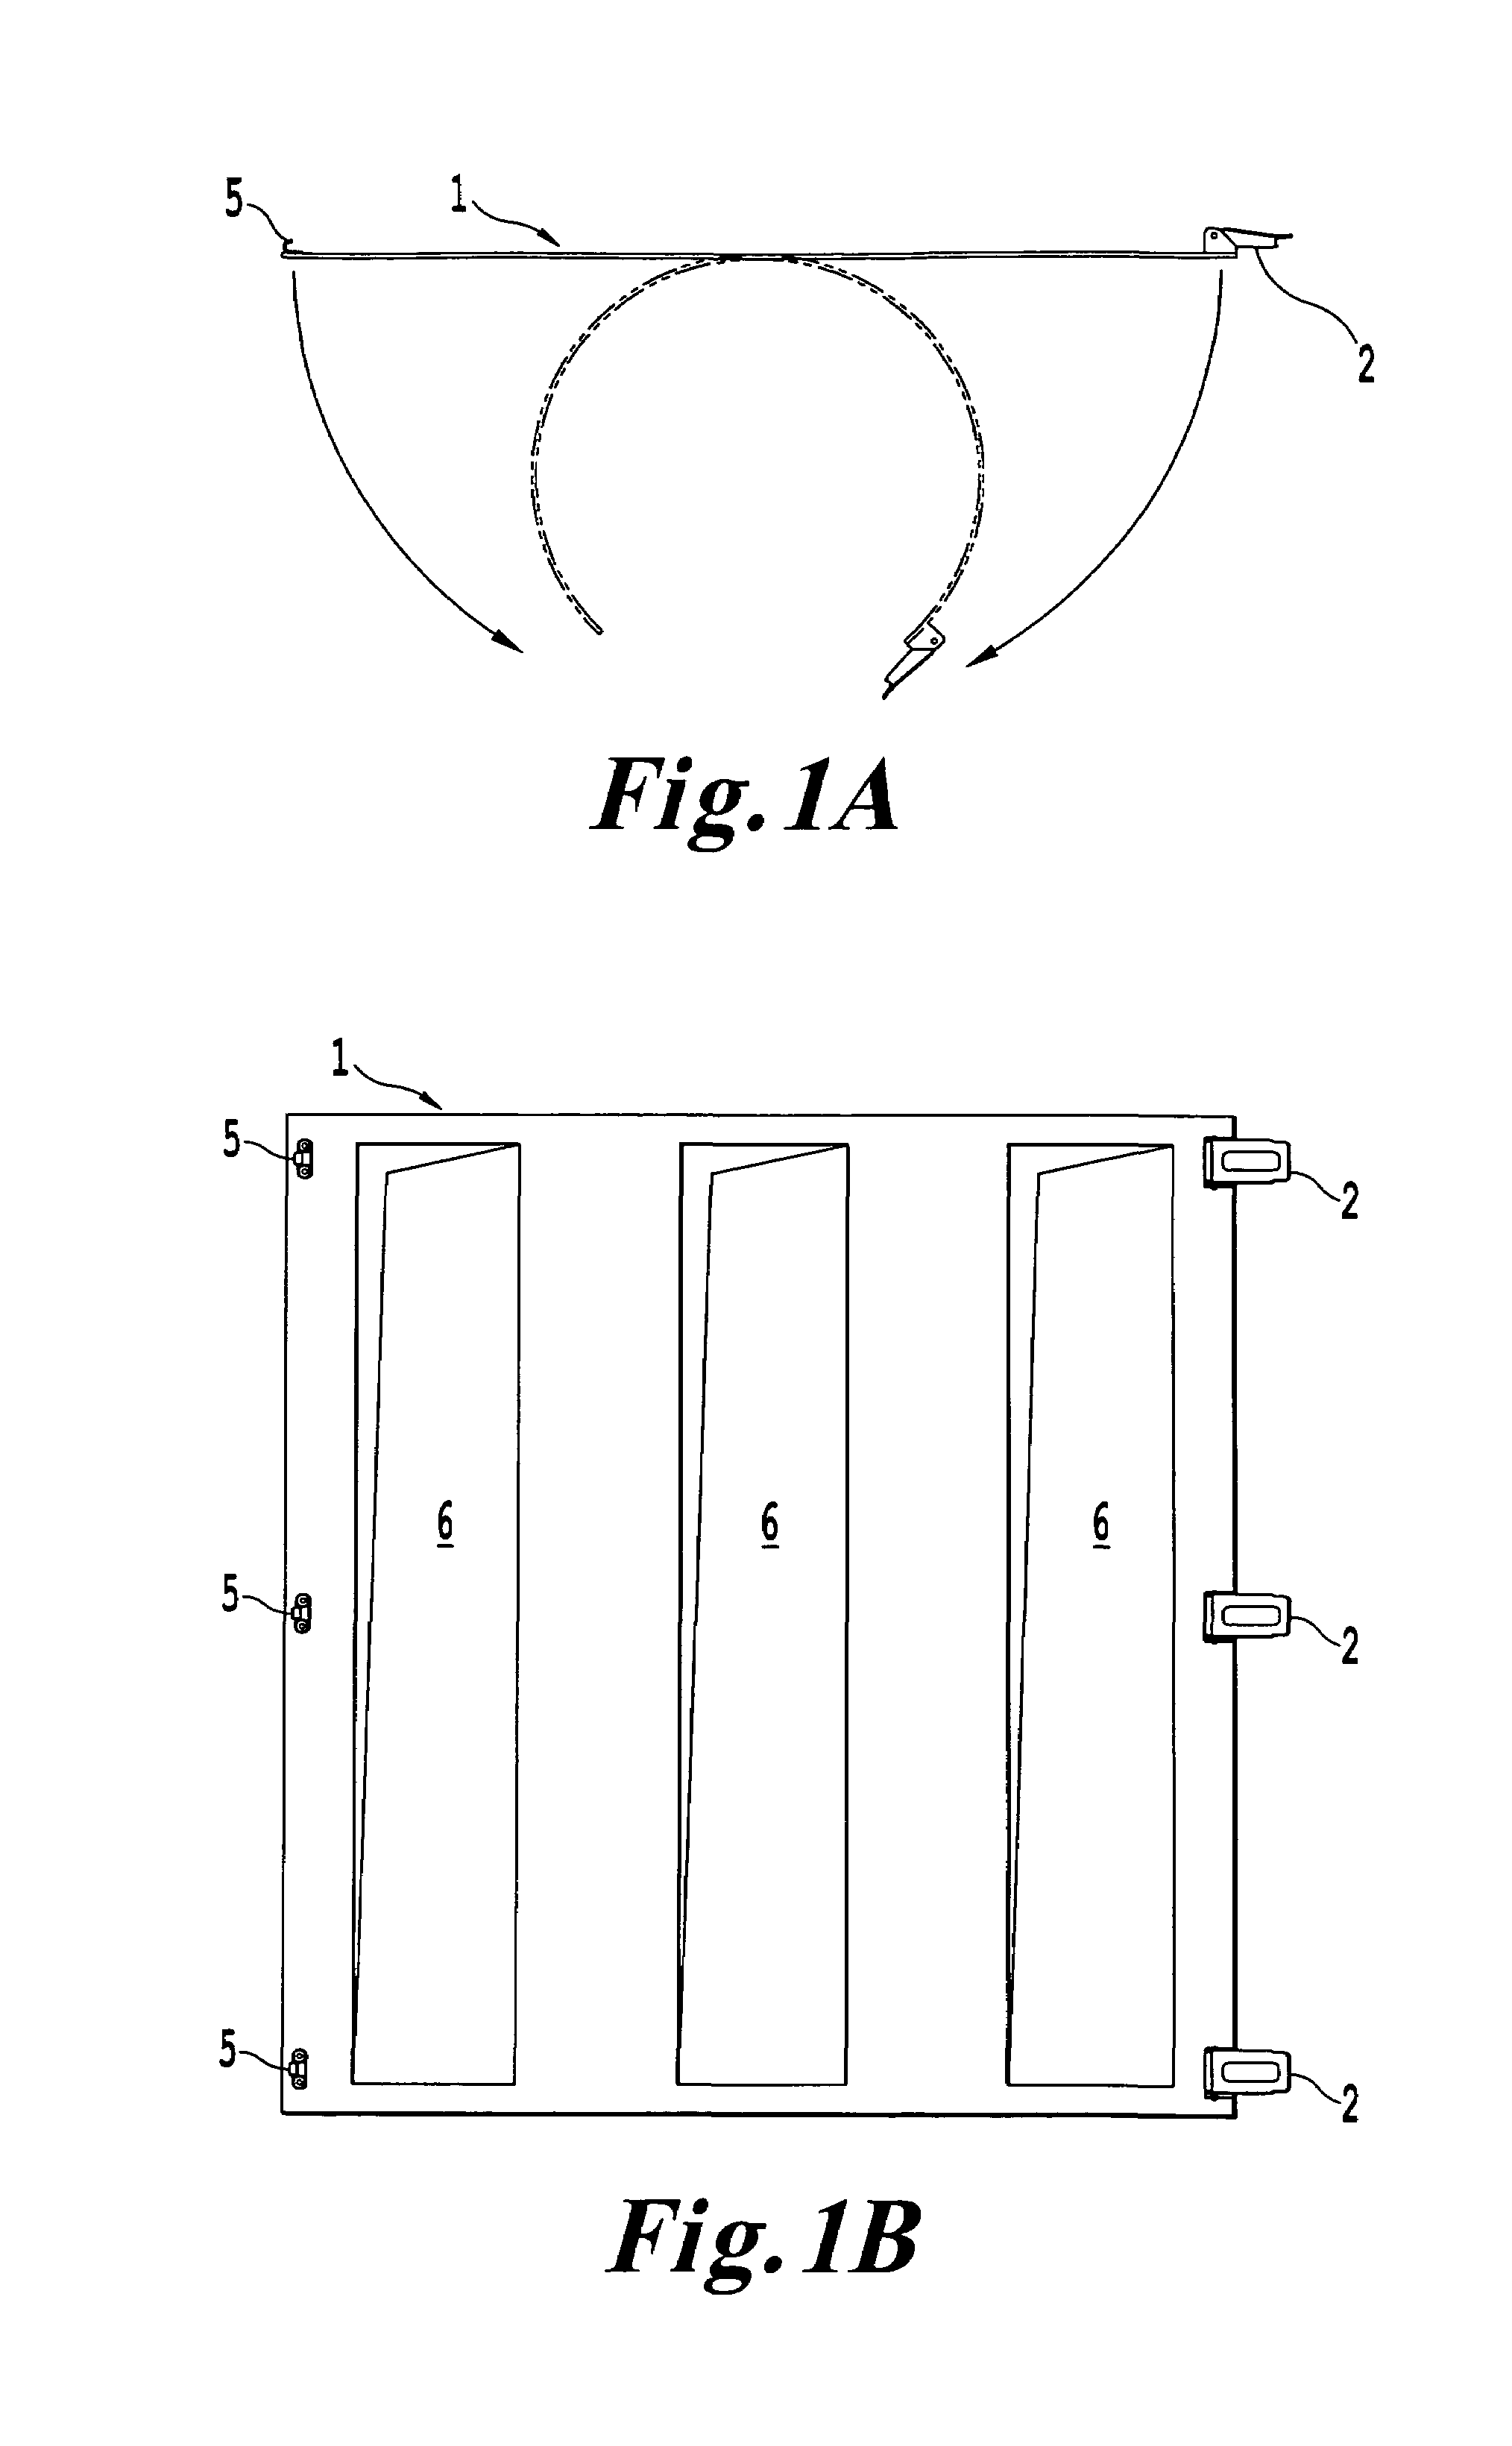 Method for making centralizers for centralising a tight fitting casing in a borehole